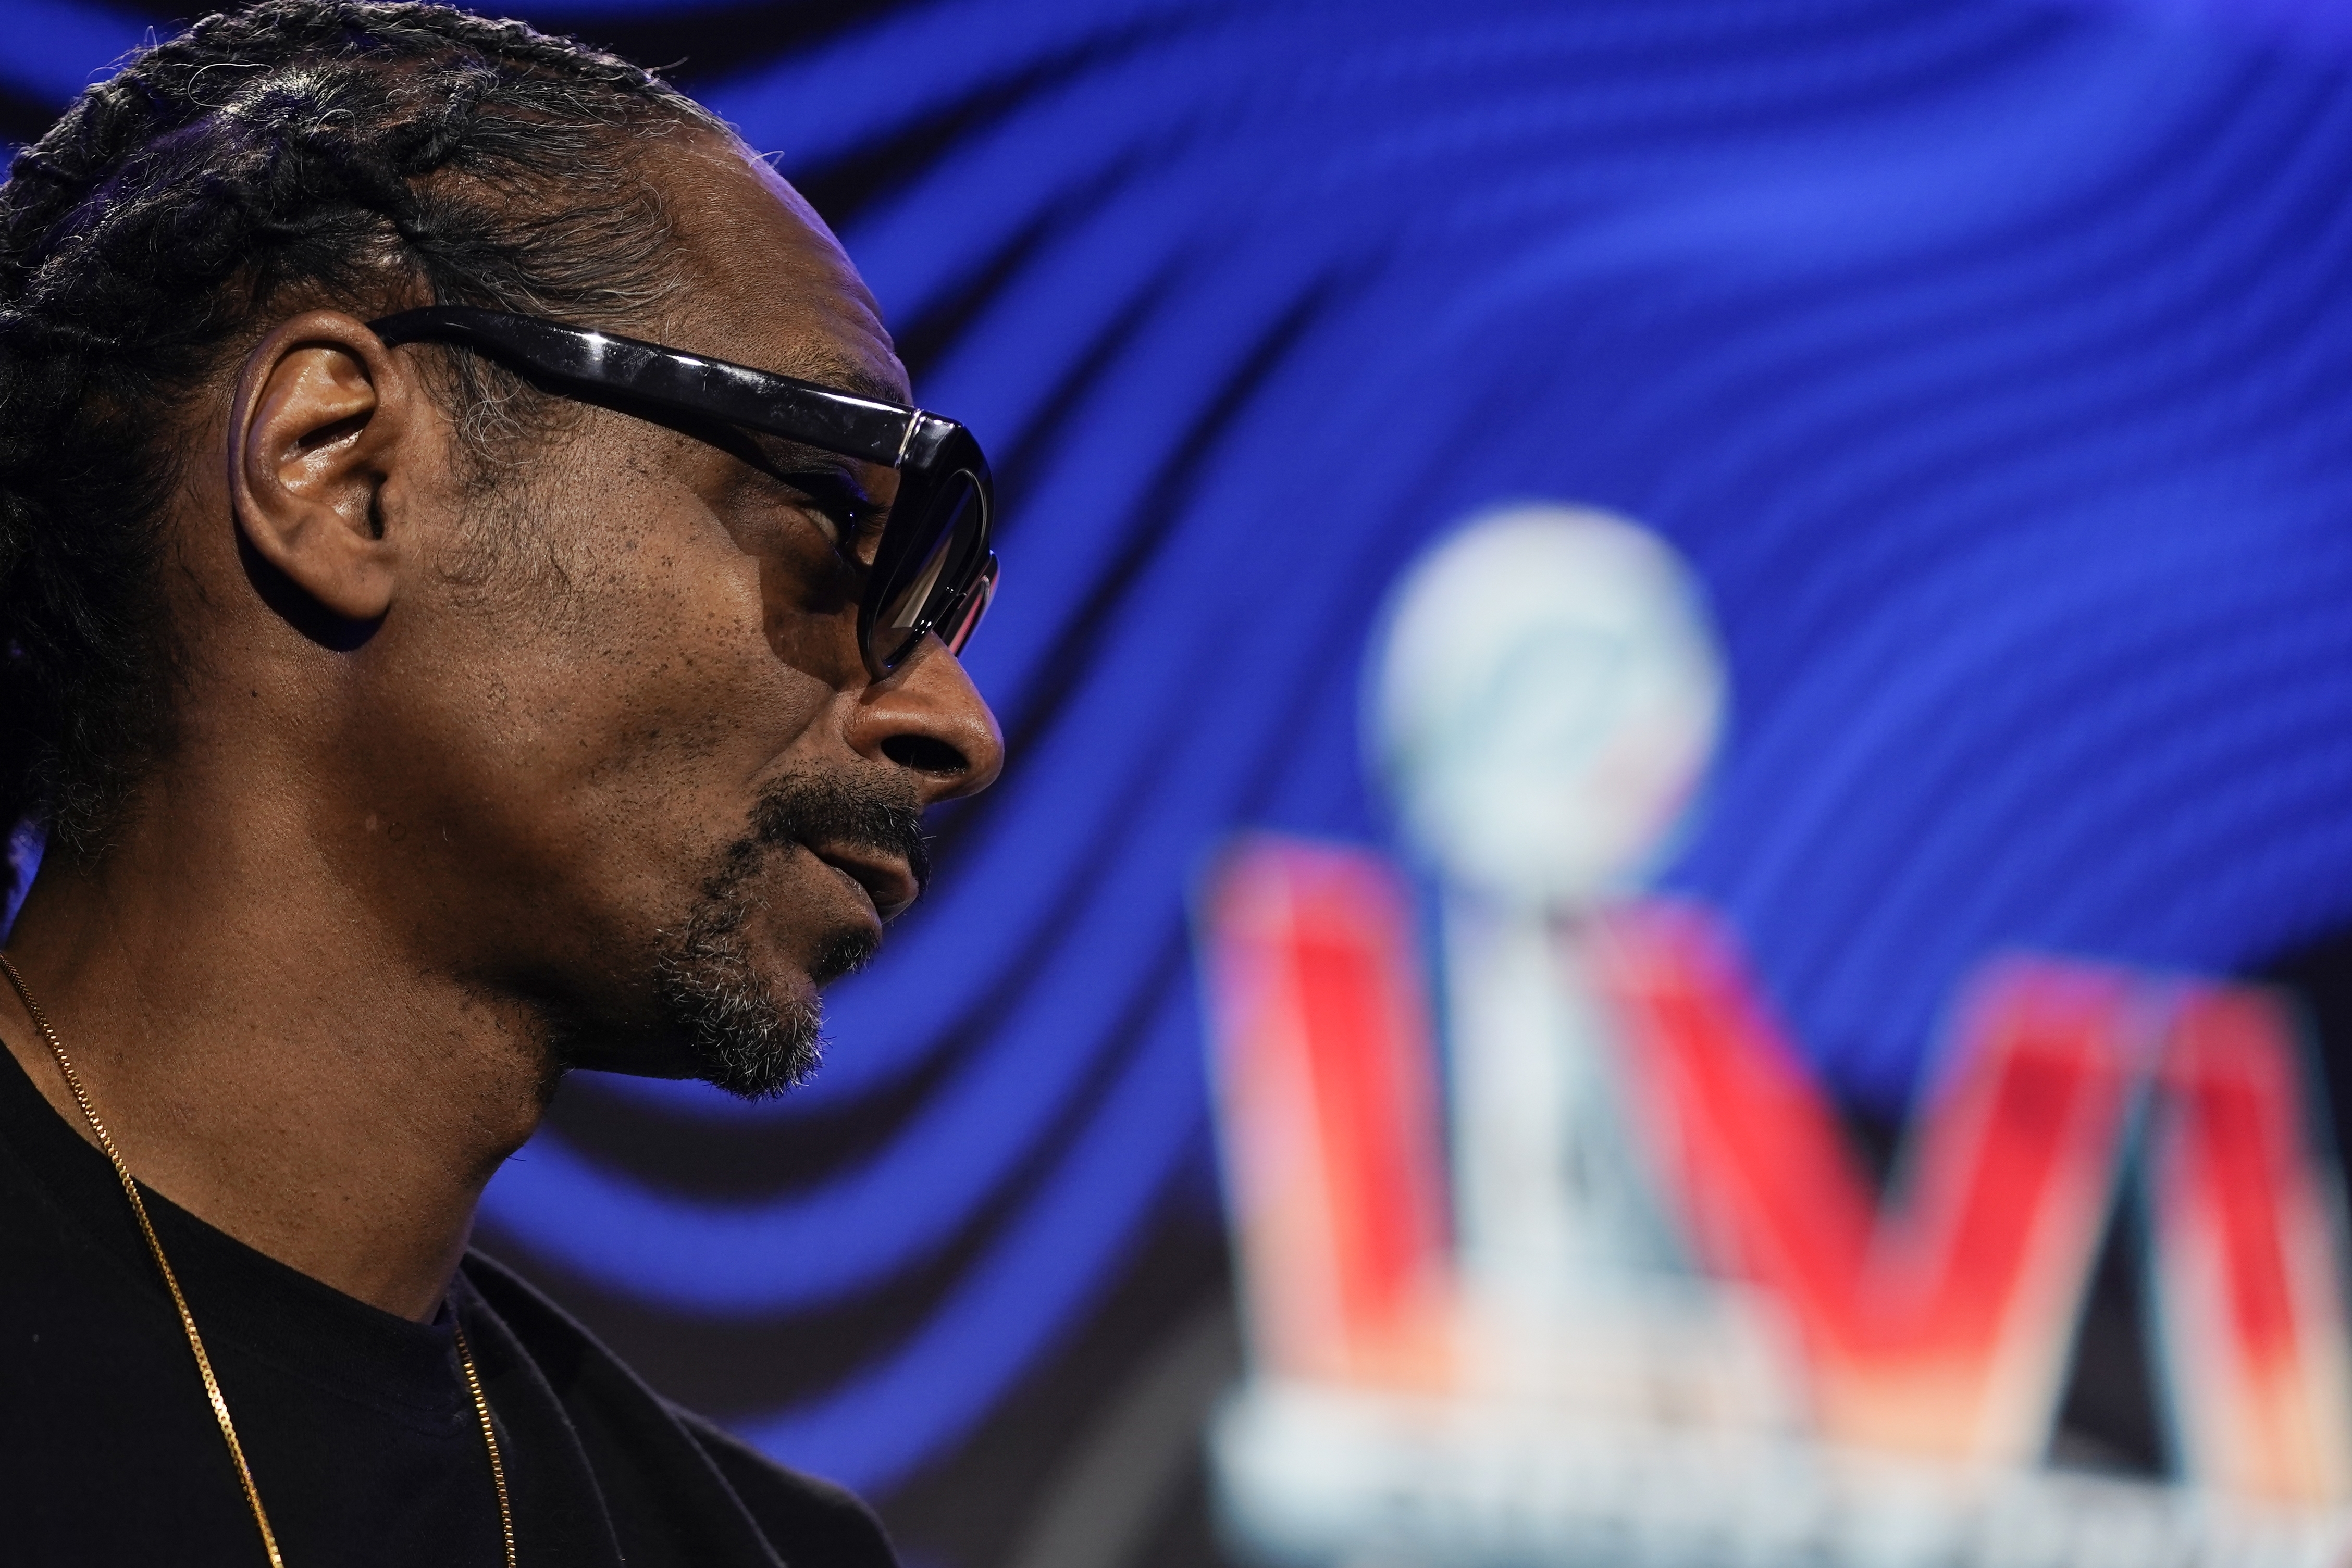 Snoop Dogg appears on new song that features anti-police lyrics -  Washington Times